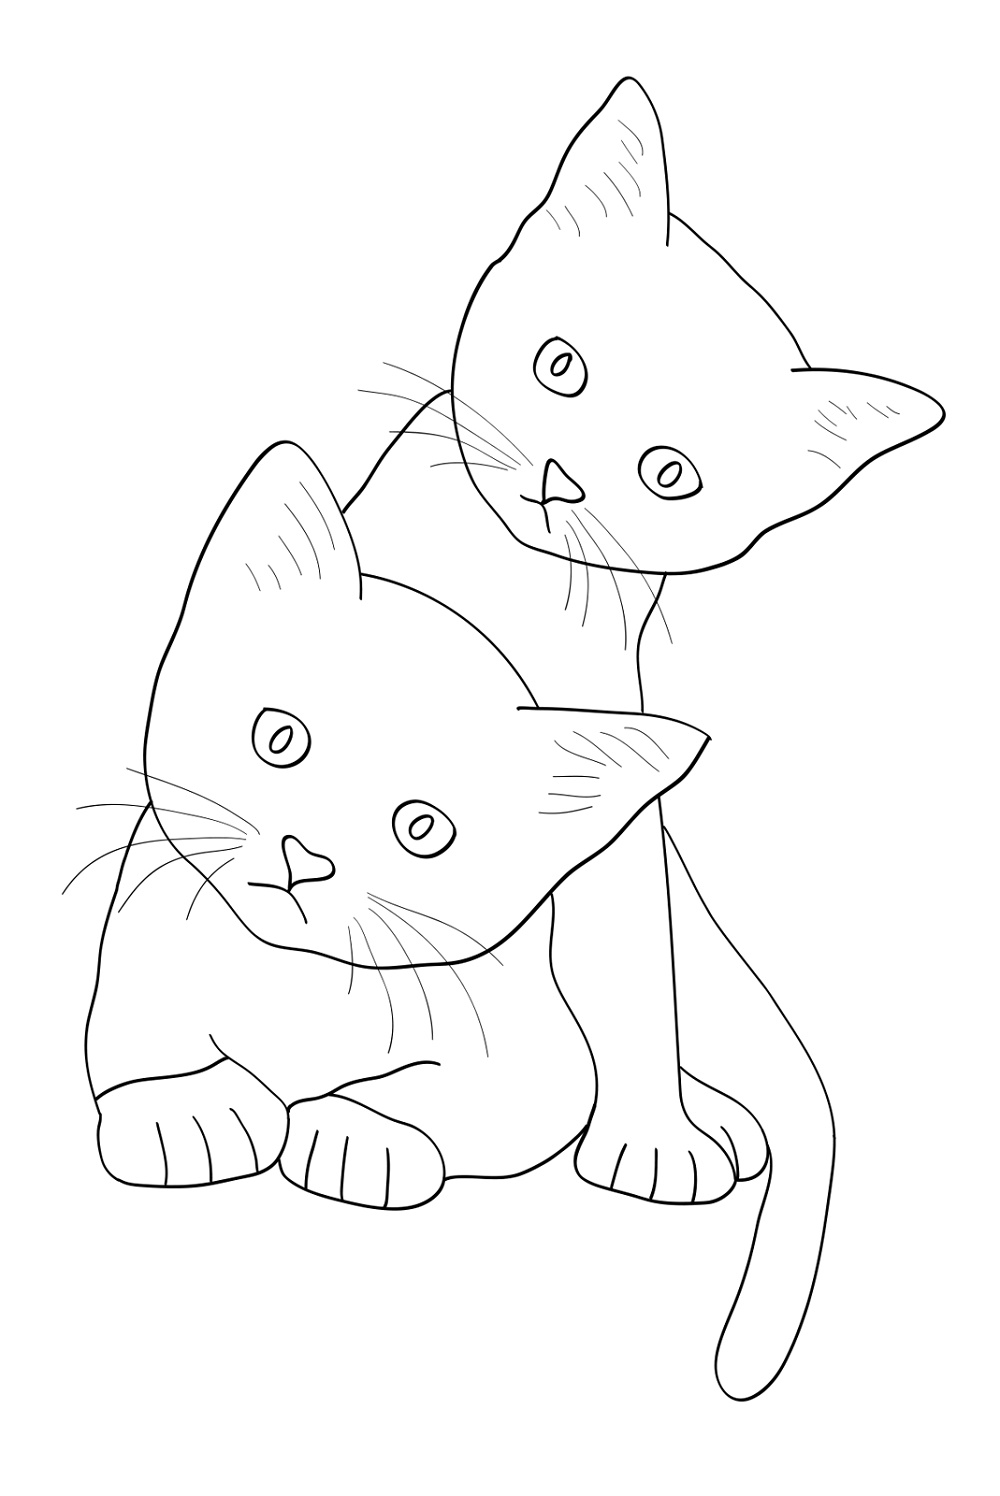 Kitten Coloring Pages Printable